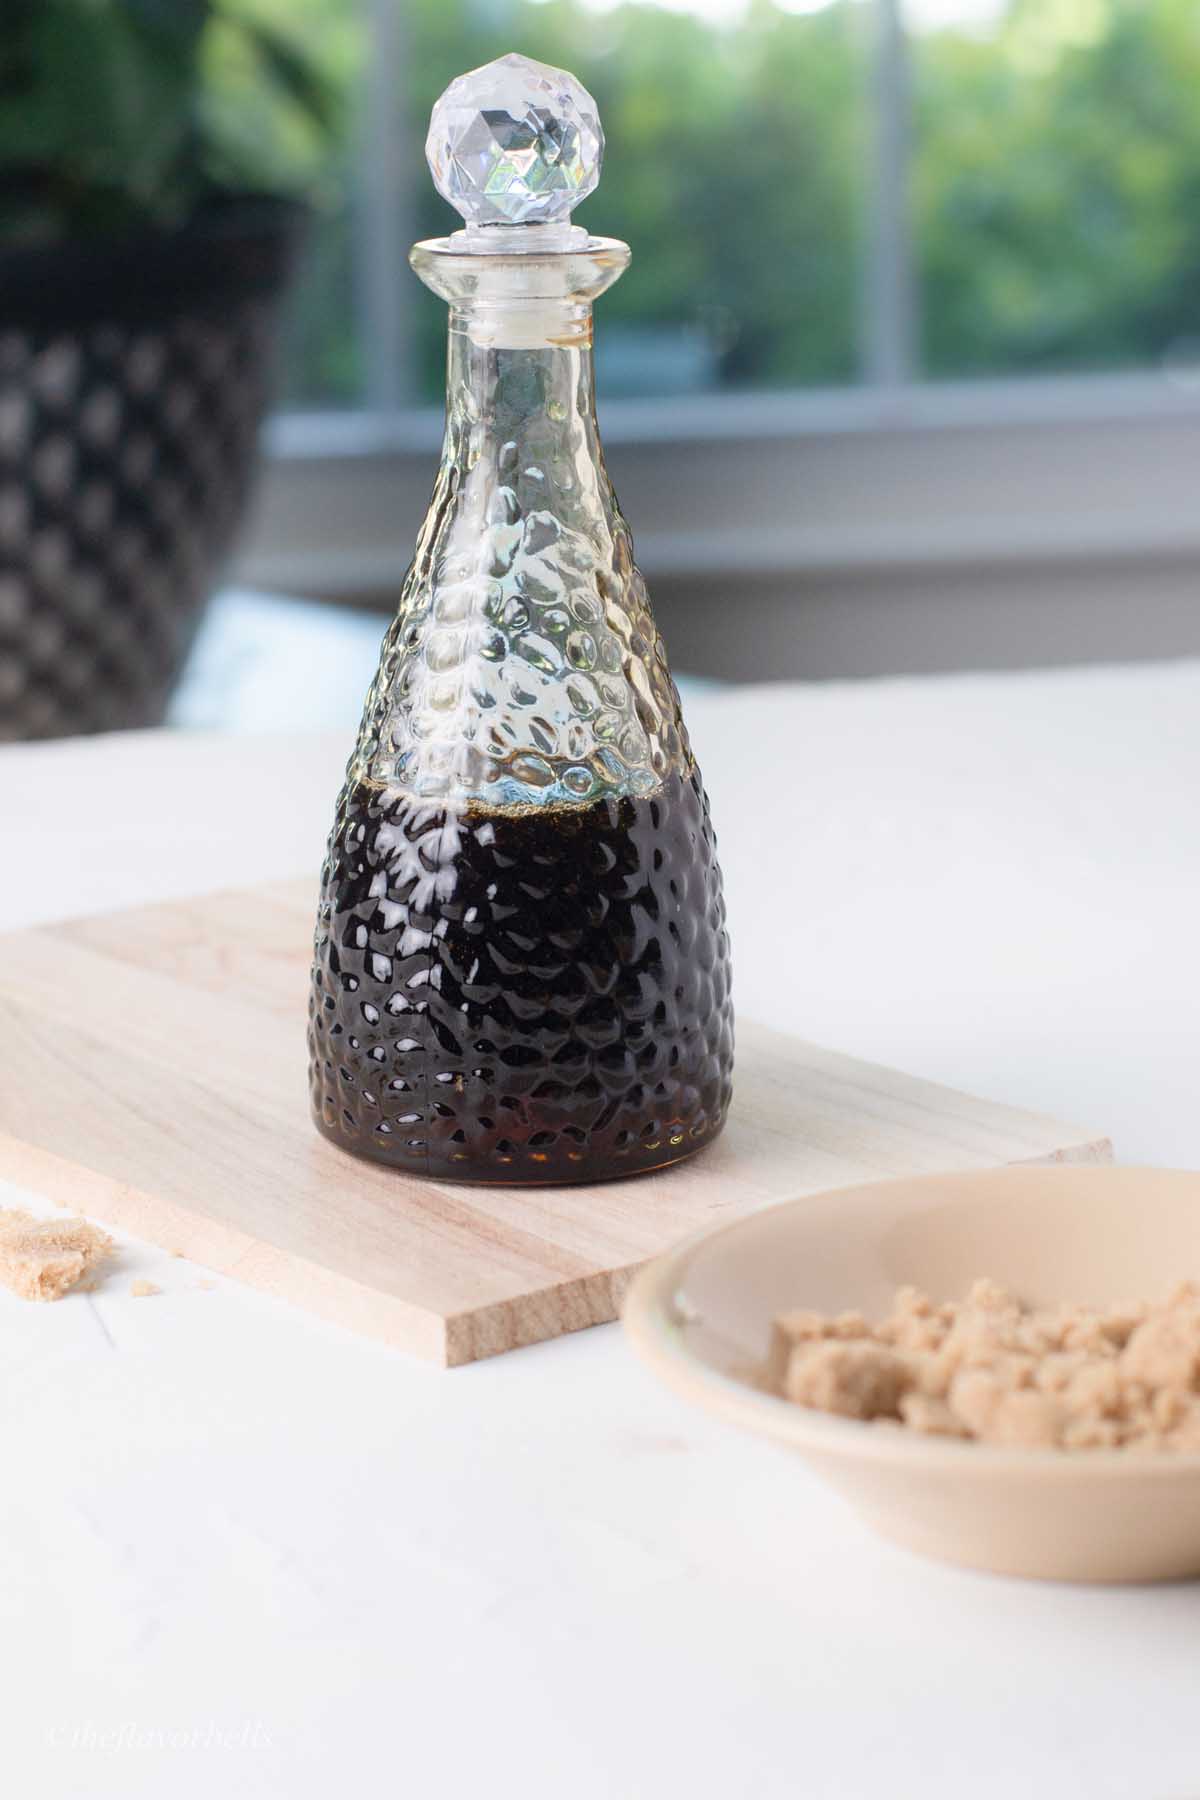 homemade thick brown sugar syrup in a glass bottle.